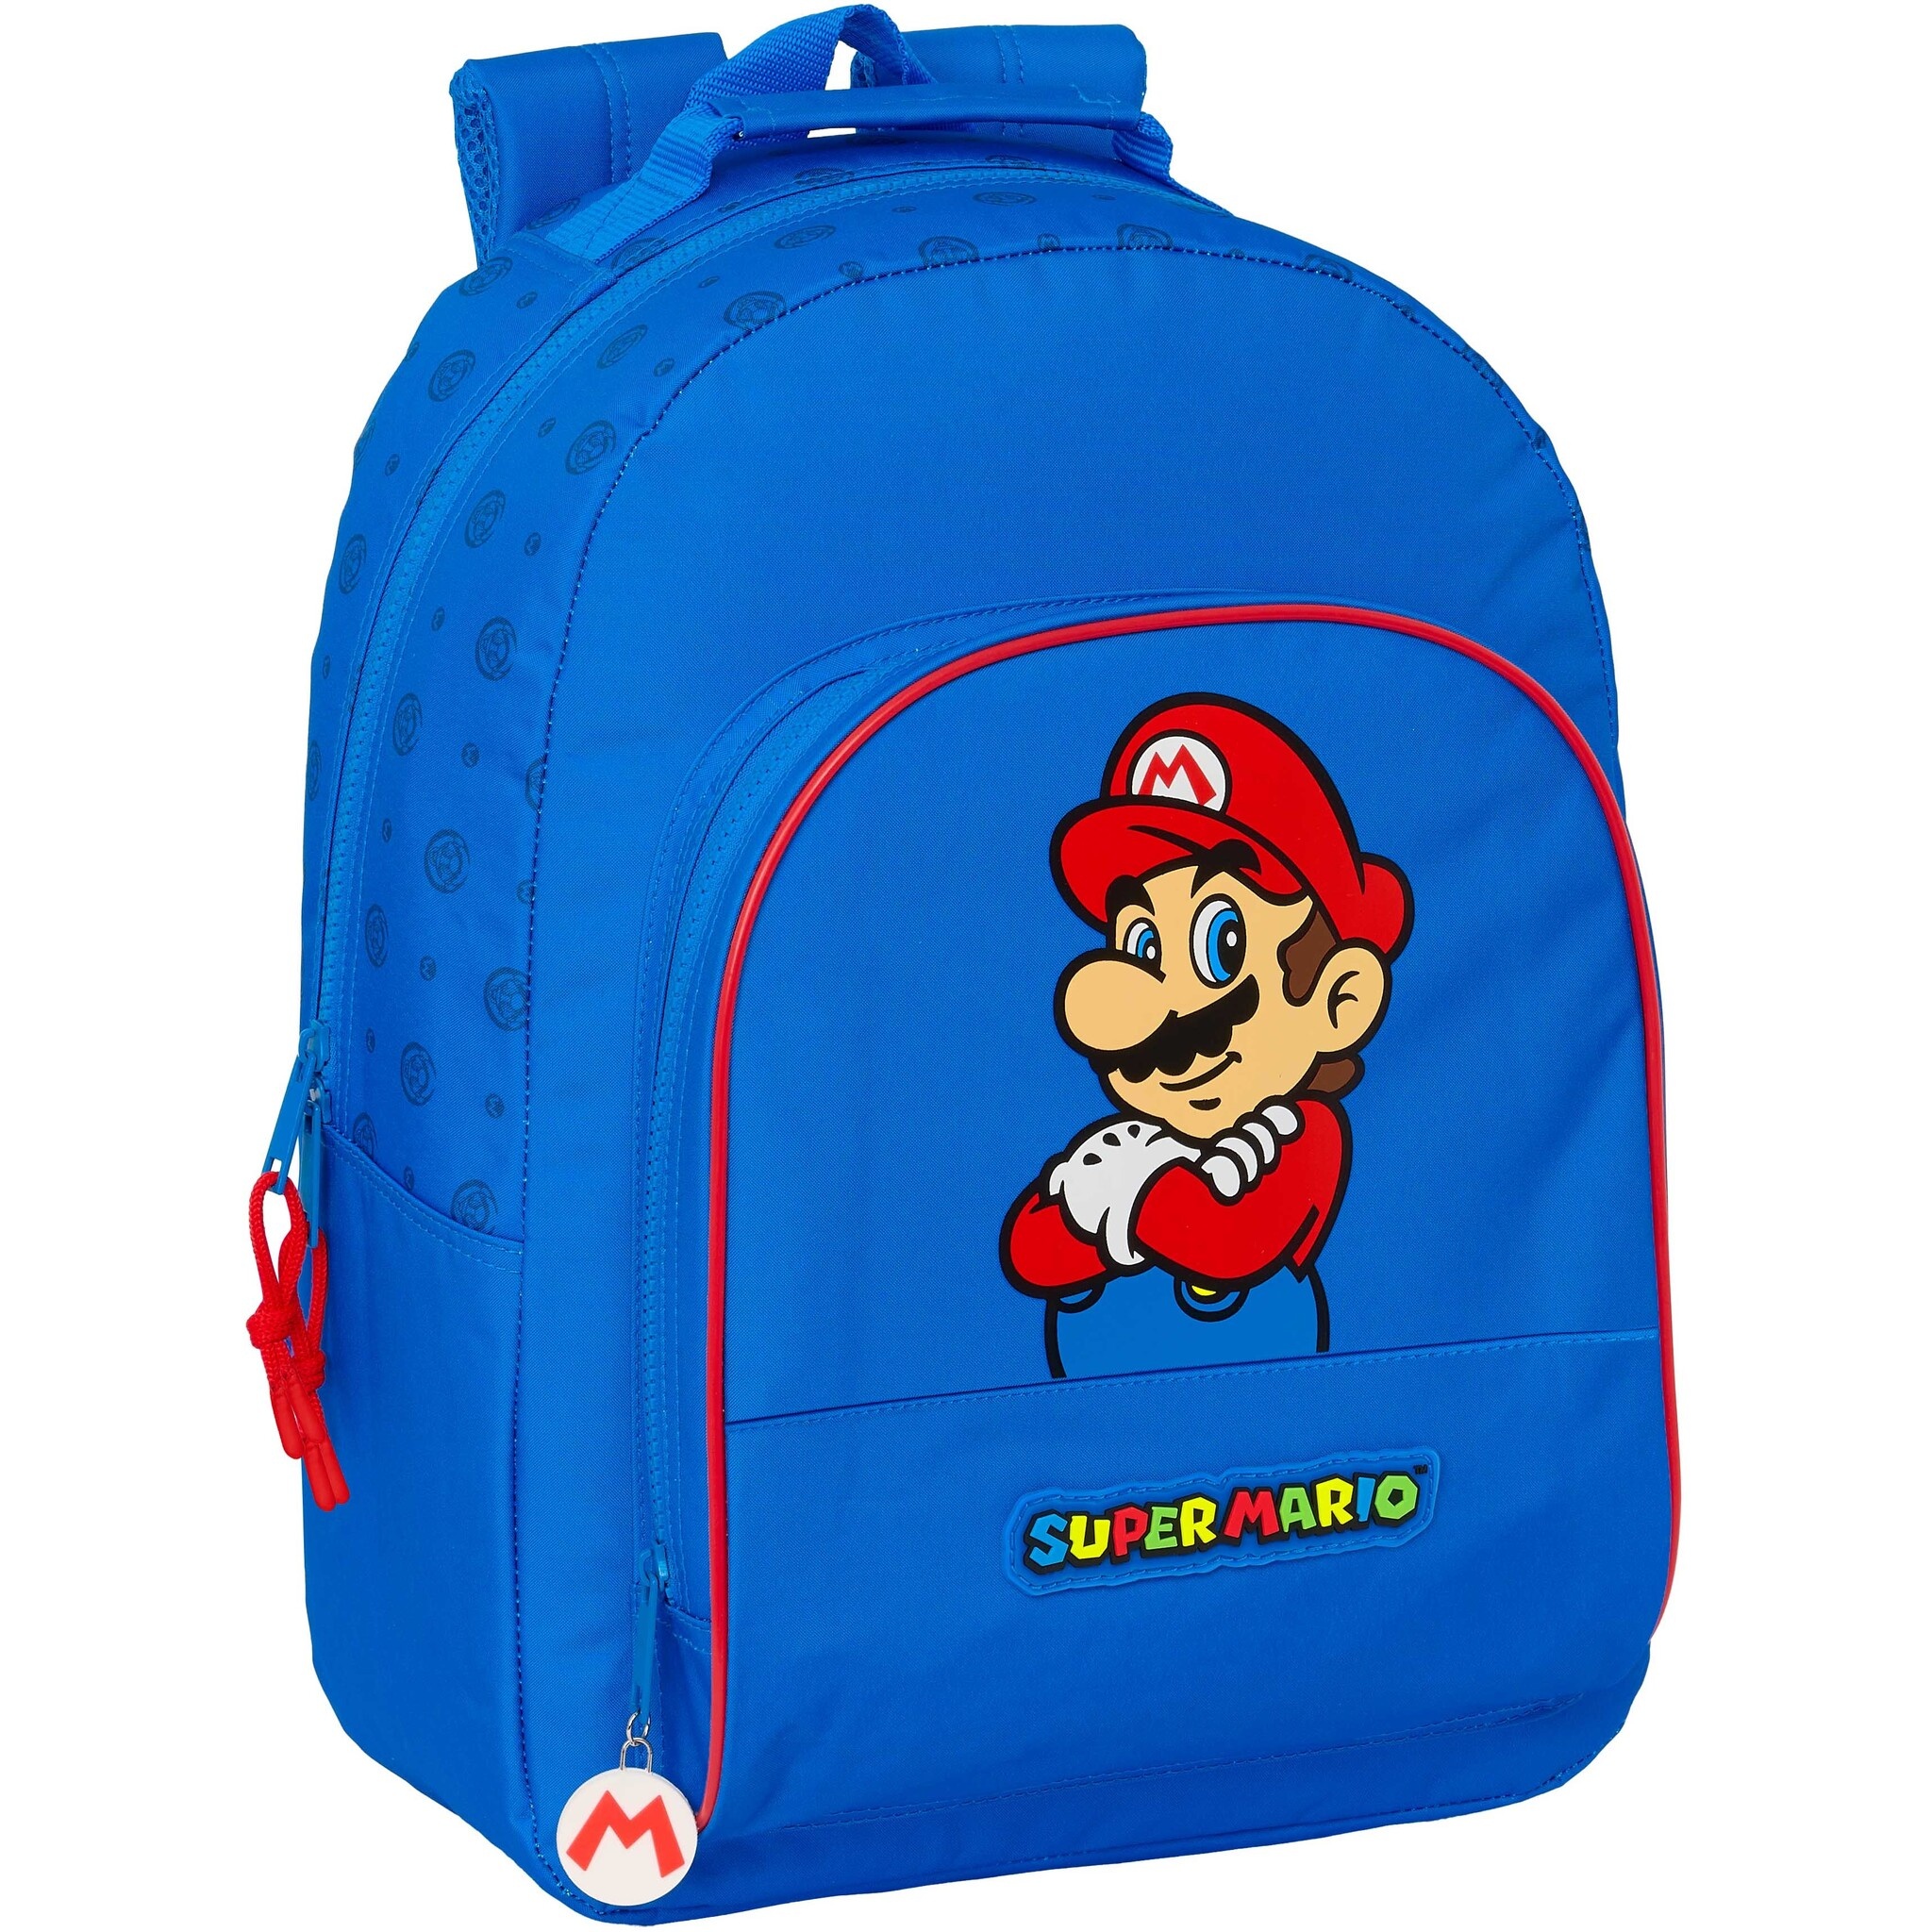 Super Mario Backpack Play - 42 x 32 x 15 cm - Polyester